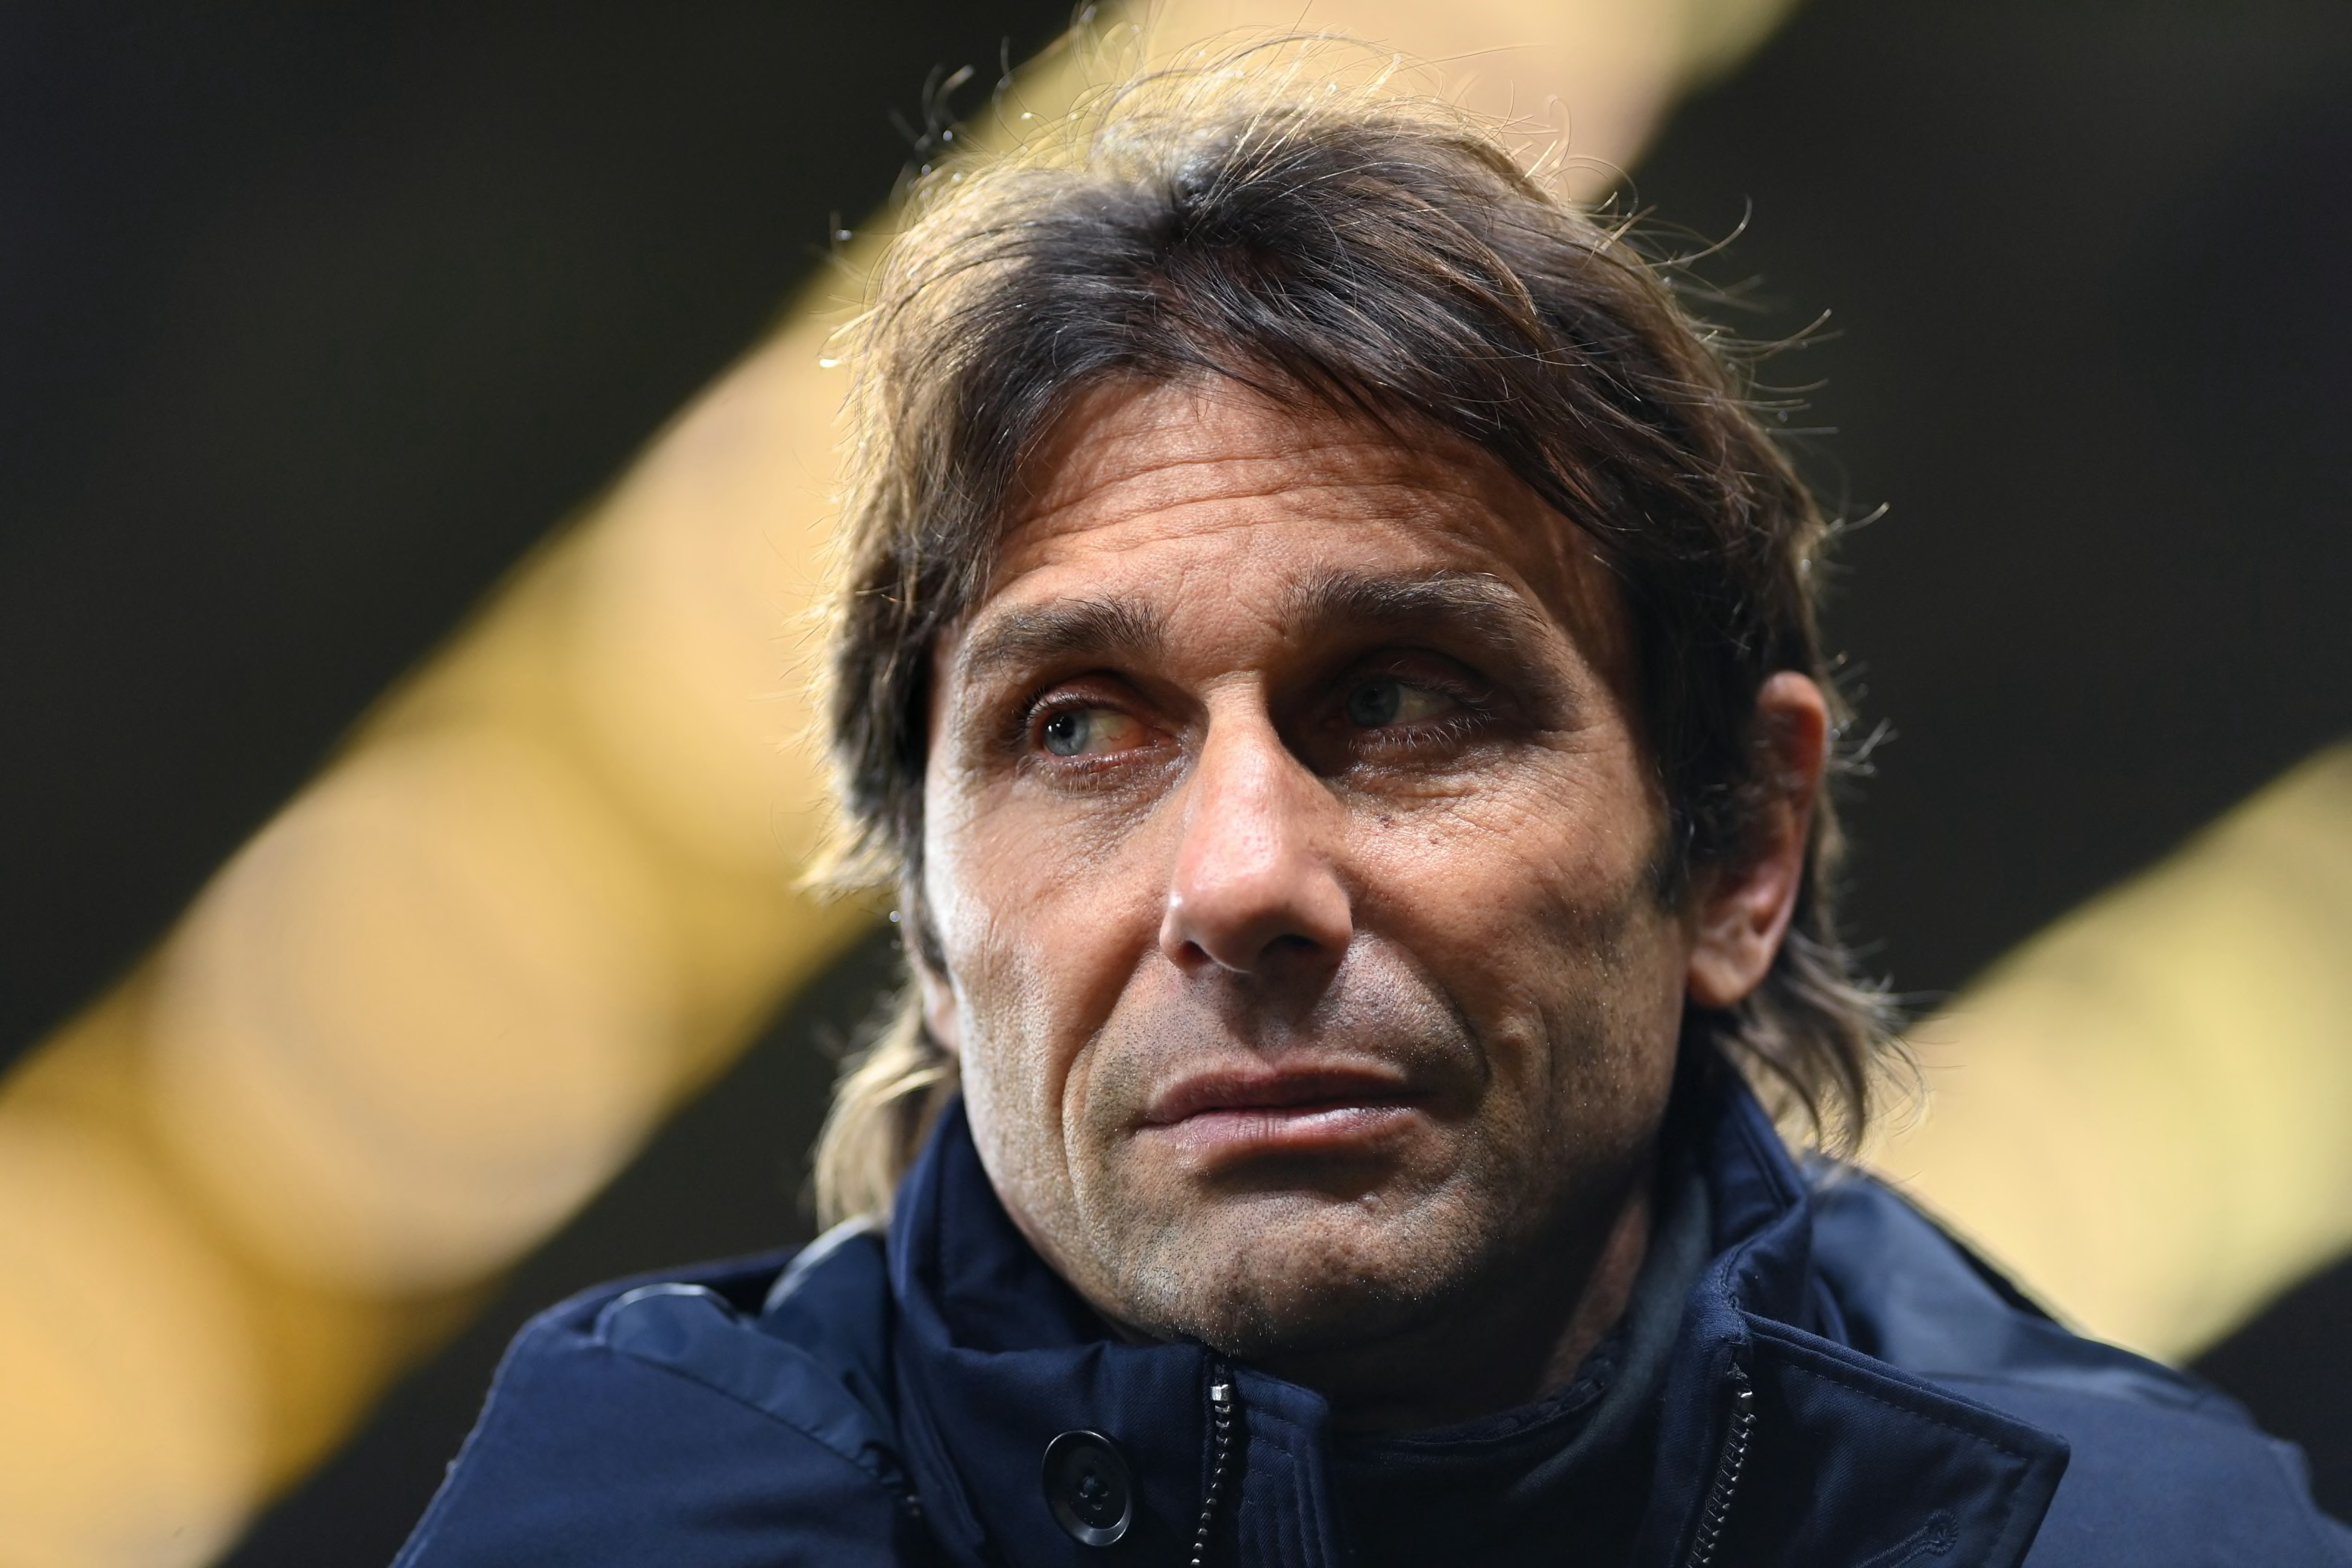 WATFORD, ENGLAND - JANUARY 01: Antonio Conte, Manager of Tottenham Hotspur looks onduring the Premier League match between Watford and Tottenham Hotspur at Vicarage Road on January 01, 2022 in Watford, England. (Photo by Justin Setterfield/Getty Images)